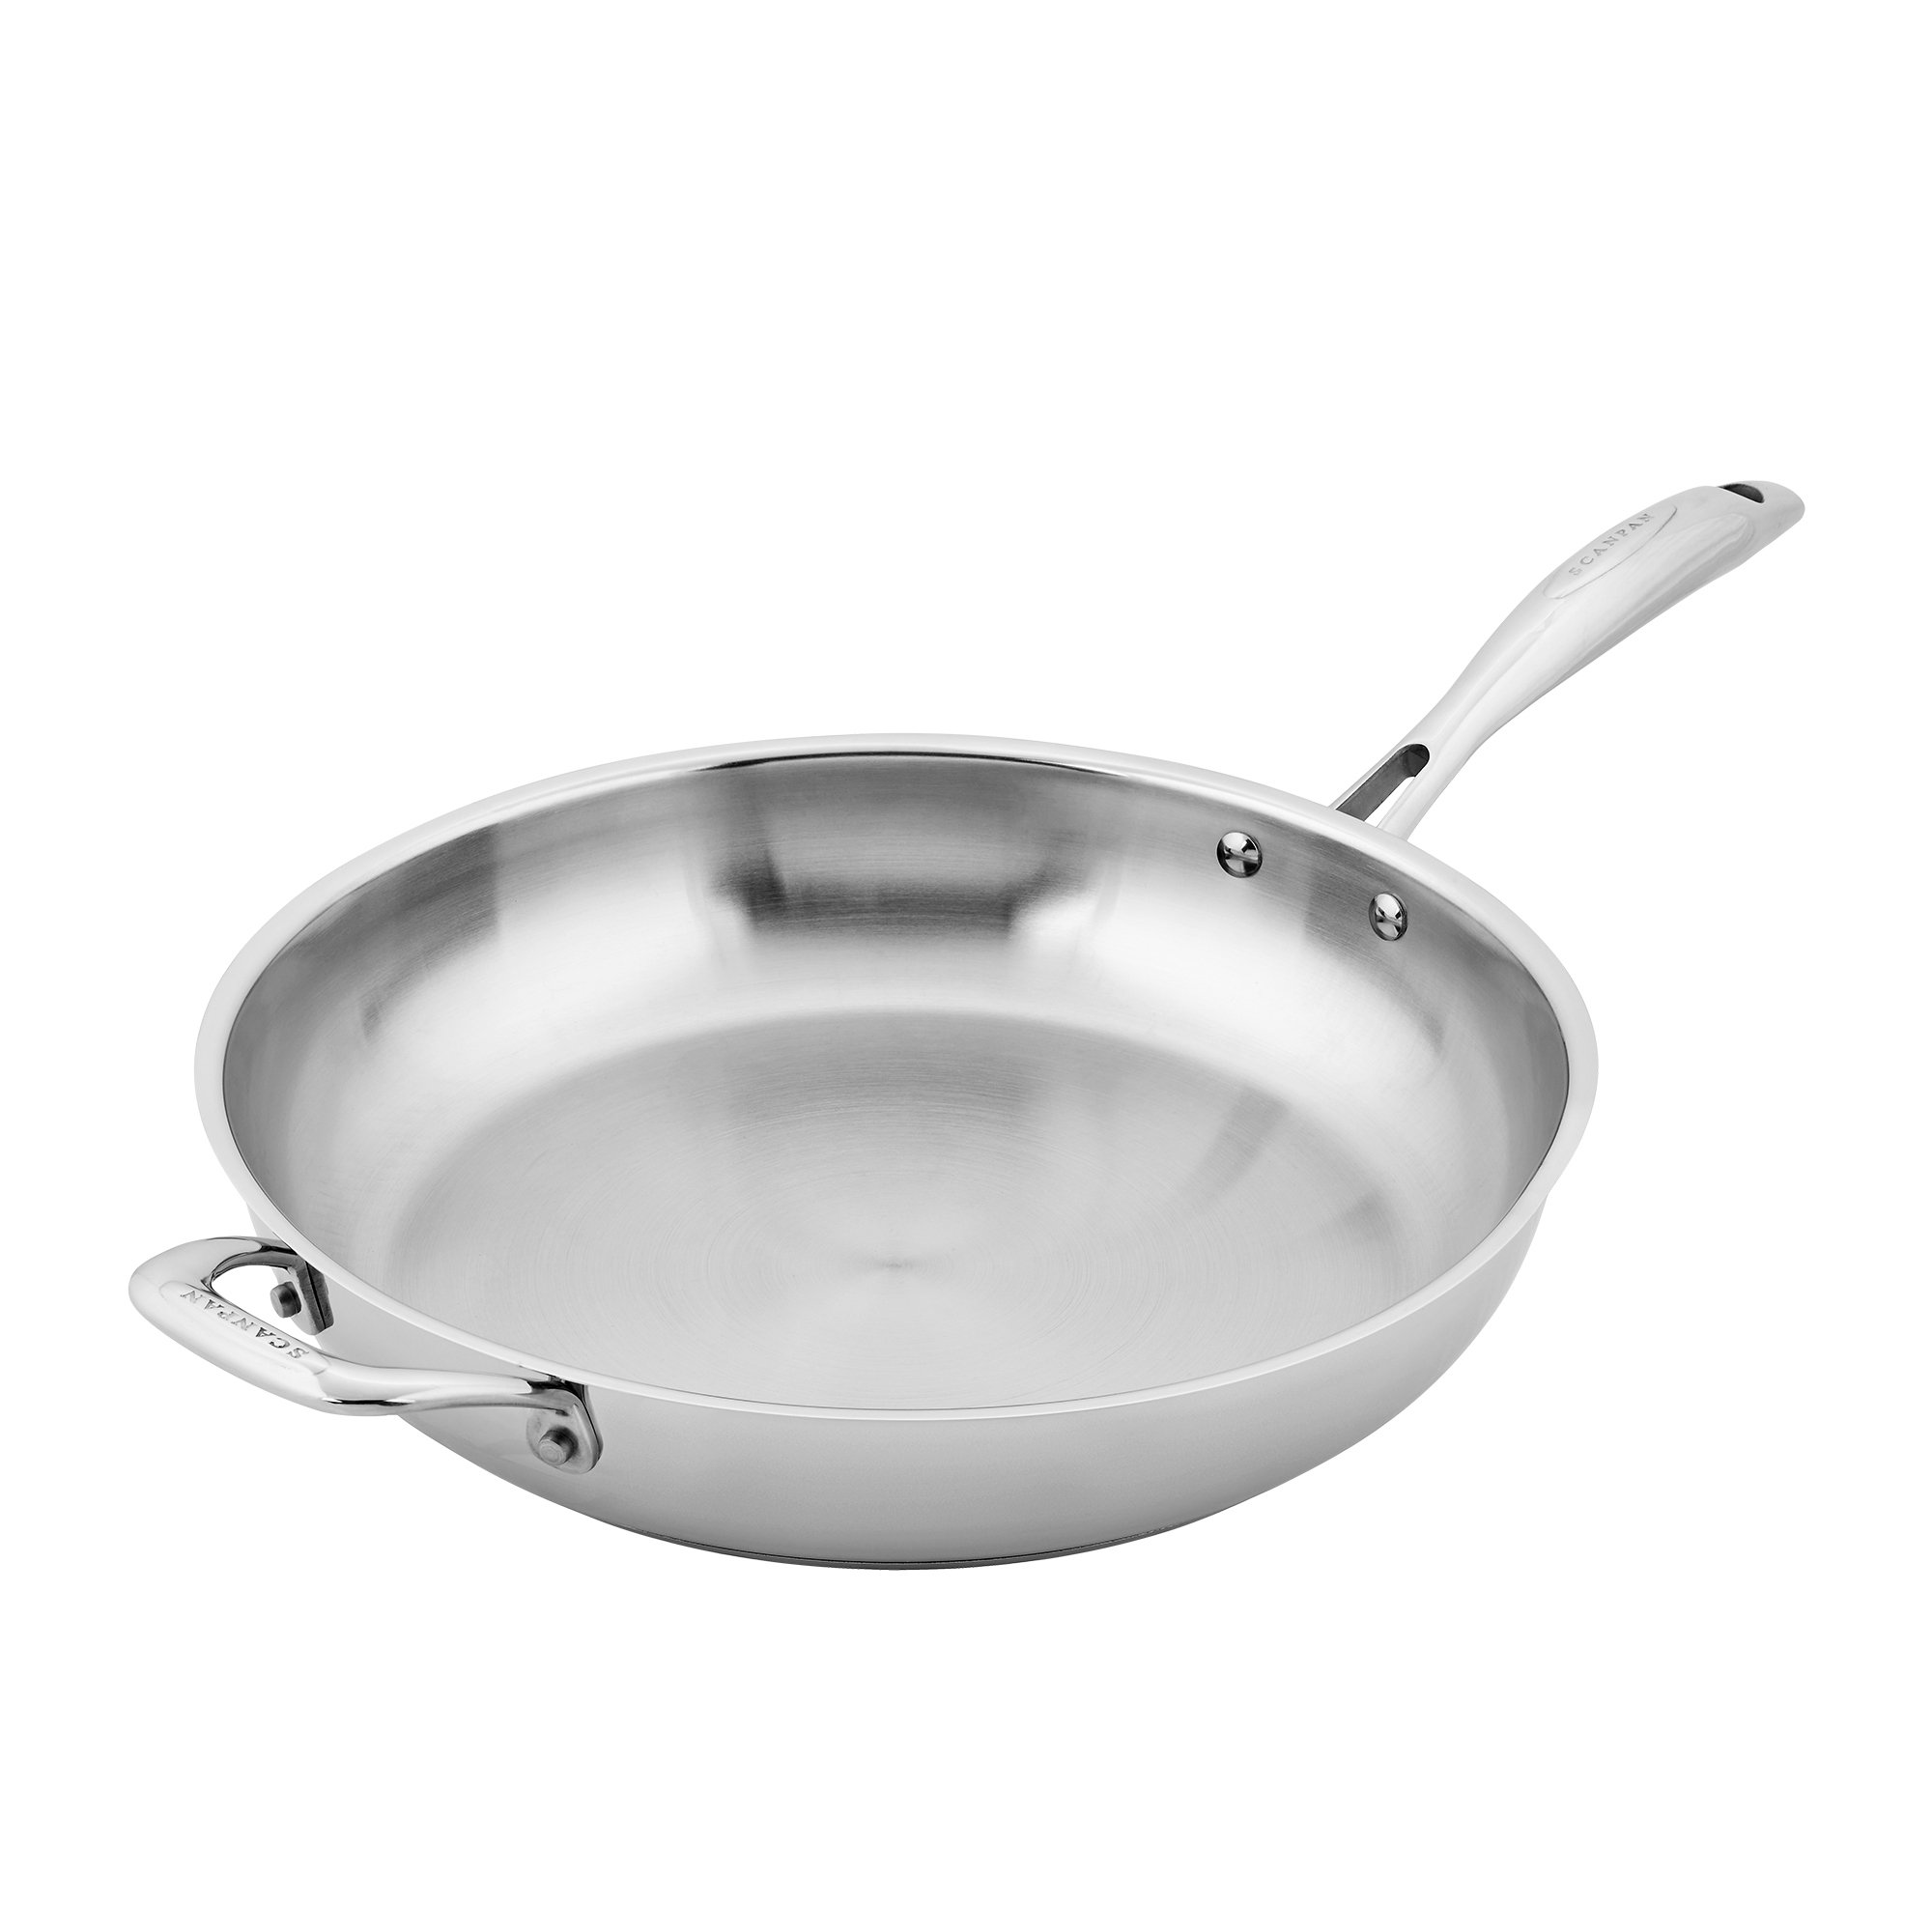 Scanpan STS Stainless Steel Frypan 32cm Image 1